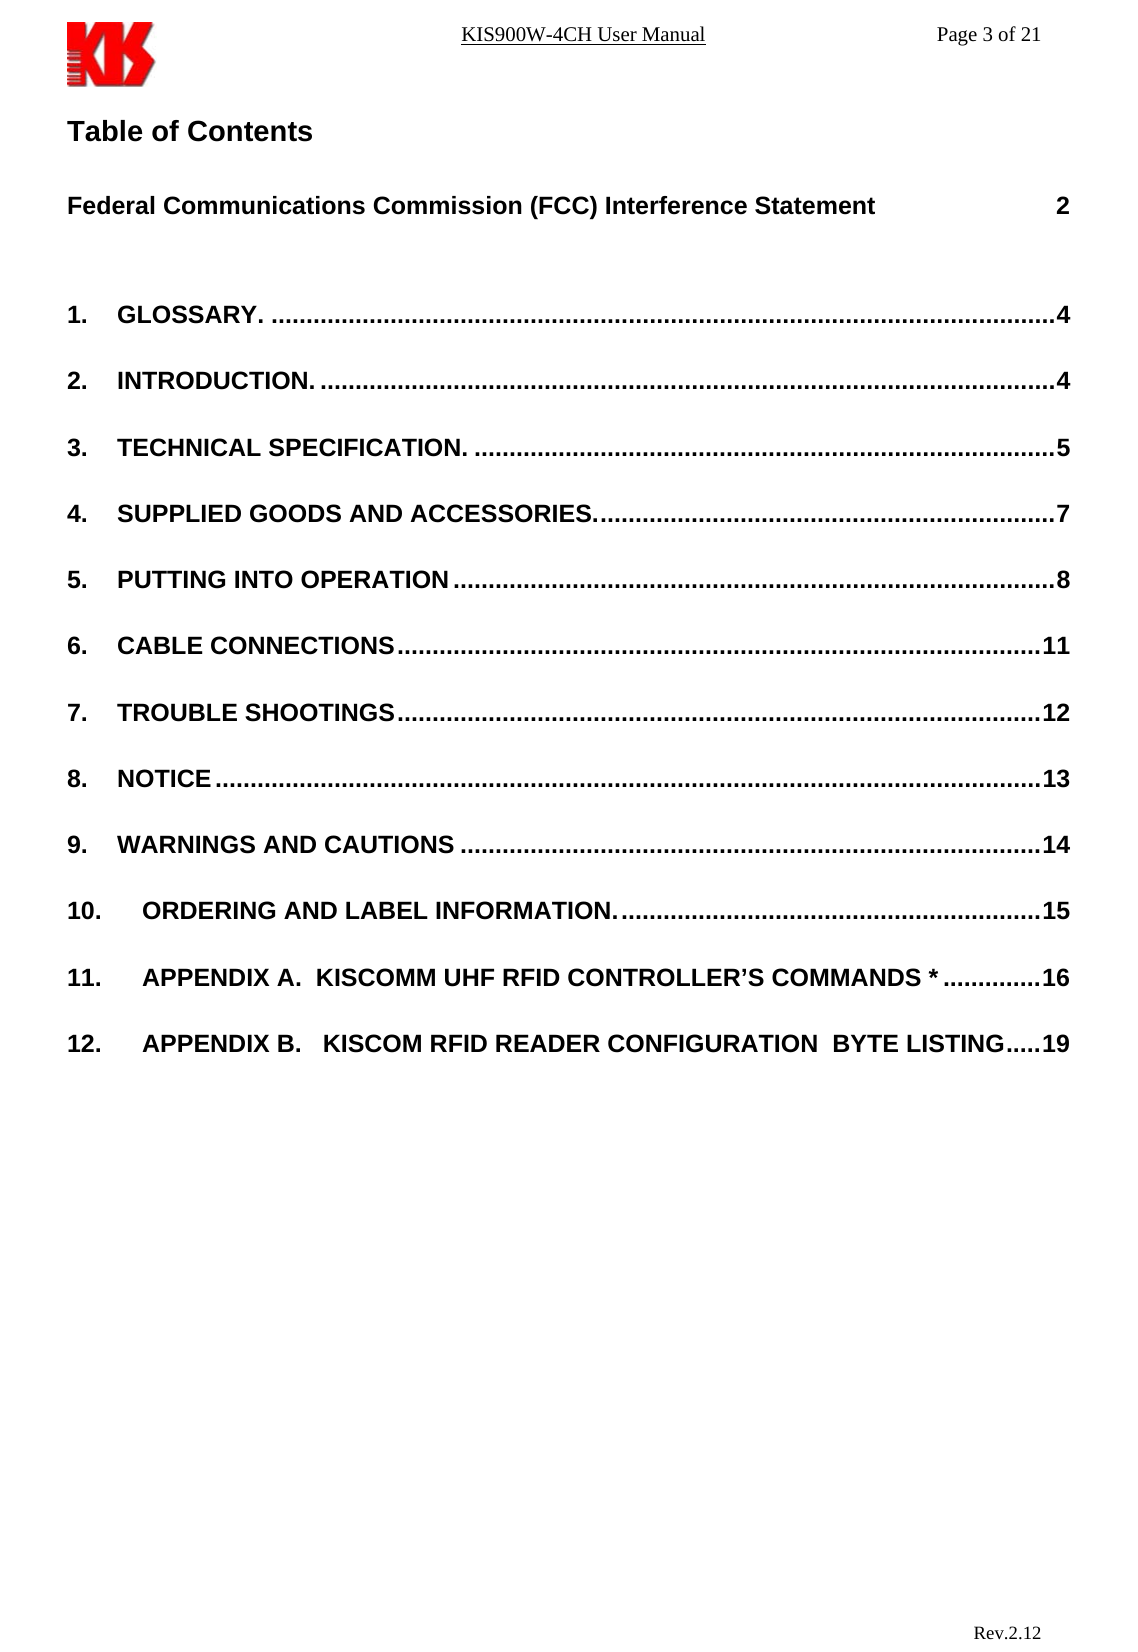 KIS900W-4CH User Manual           Page 3 of 21 Table of Contents  Federal Communications Commission (FCC) Interference Statement                          2  1. GLOSSARY. ................................................................................................................4 2. INTRODUCTION. .........................................................................................................4 3. TECHNICAL SPECIFICATION. ...................................................................................5 4. SUPPLIED GOODS AND ACCESSORIES..................................................................7 5. PUTTING INTO OPERATION......................................................................................8 6. CABLE CONNECTIONS............................................................................................11 7. TROUBLE SHOOTINGS............................................................................................12 8. NOTICE......................................................................................................................13 9. WARNINGS AND CAUTIONS ...................................................................................14 10. ORDERING AND LABEL INFORMATION.............................................................15 11. APPENDIX A.  KISCOMM UHF RFID CONTROLLER’S COMMANDS * ..............16 12. APPENDIX B.   KISCOM RFID READER CONFIGURATION  BYTE LISTING.....19                                Rev.2.12  